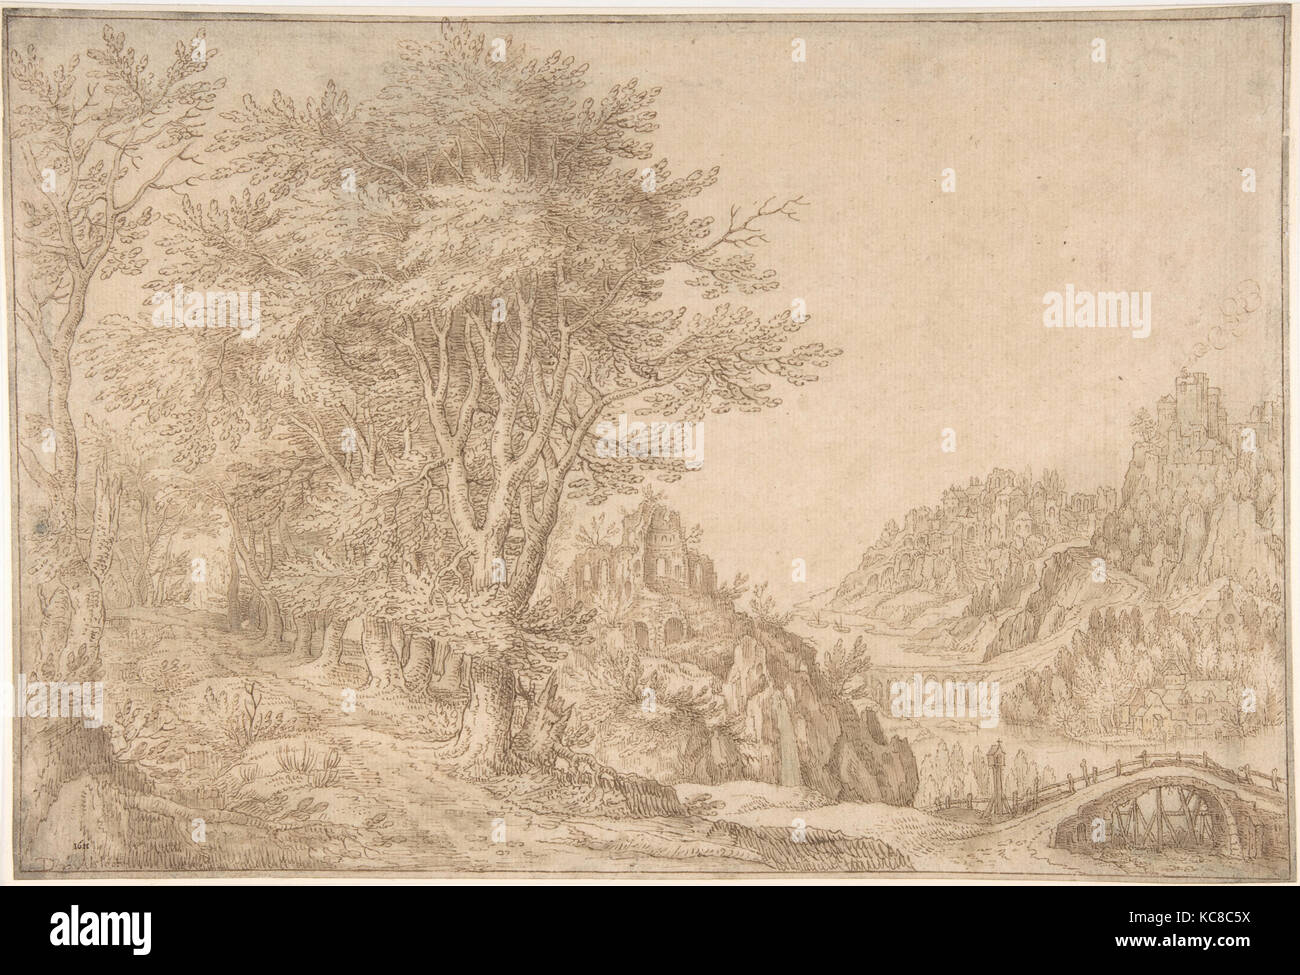 Wooded Landscape with a River, Castle, and Town Beyond, Denis van Alsloot, 1611 Stock Photo